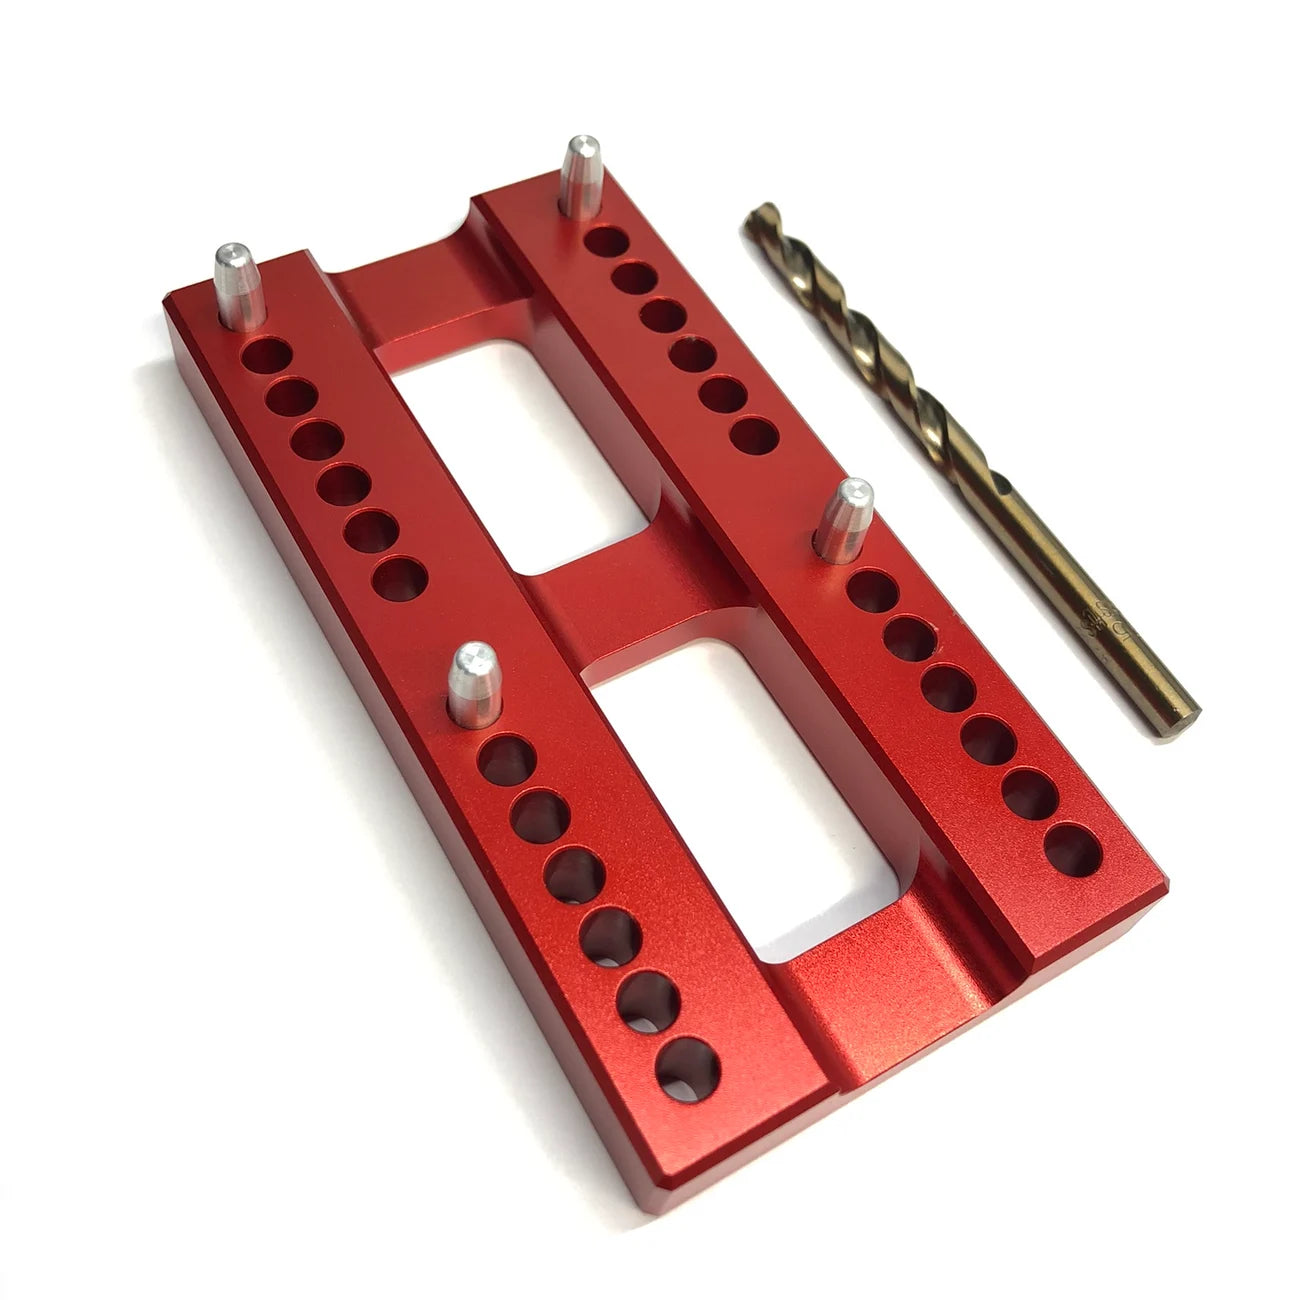 Chems Skateboard Wheelbase Mod Tool; Red tool designed for adjusting the wheelbase on a skateboard; Helps customize and fine-tune the ride and performance of your skateboard; Durable construction for long-lasting use.